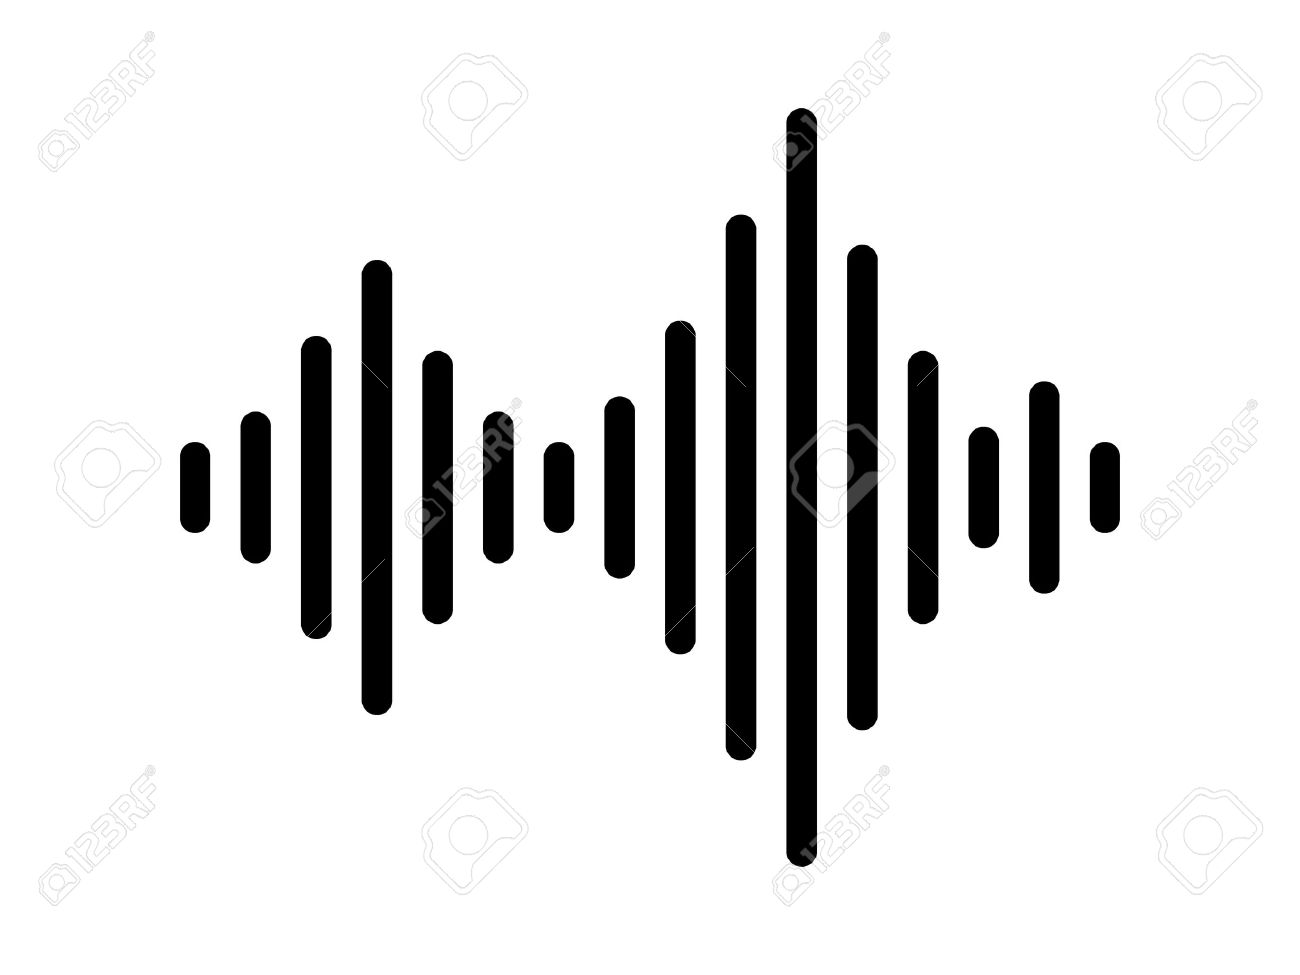 70075273-sound-audio-wave-or-soundwave-line-art-vector-icon-for-music-apps-and-websites.jpg